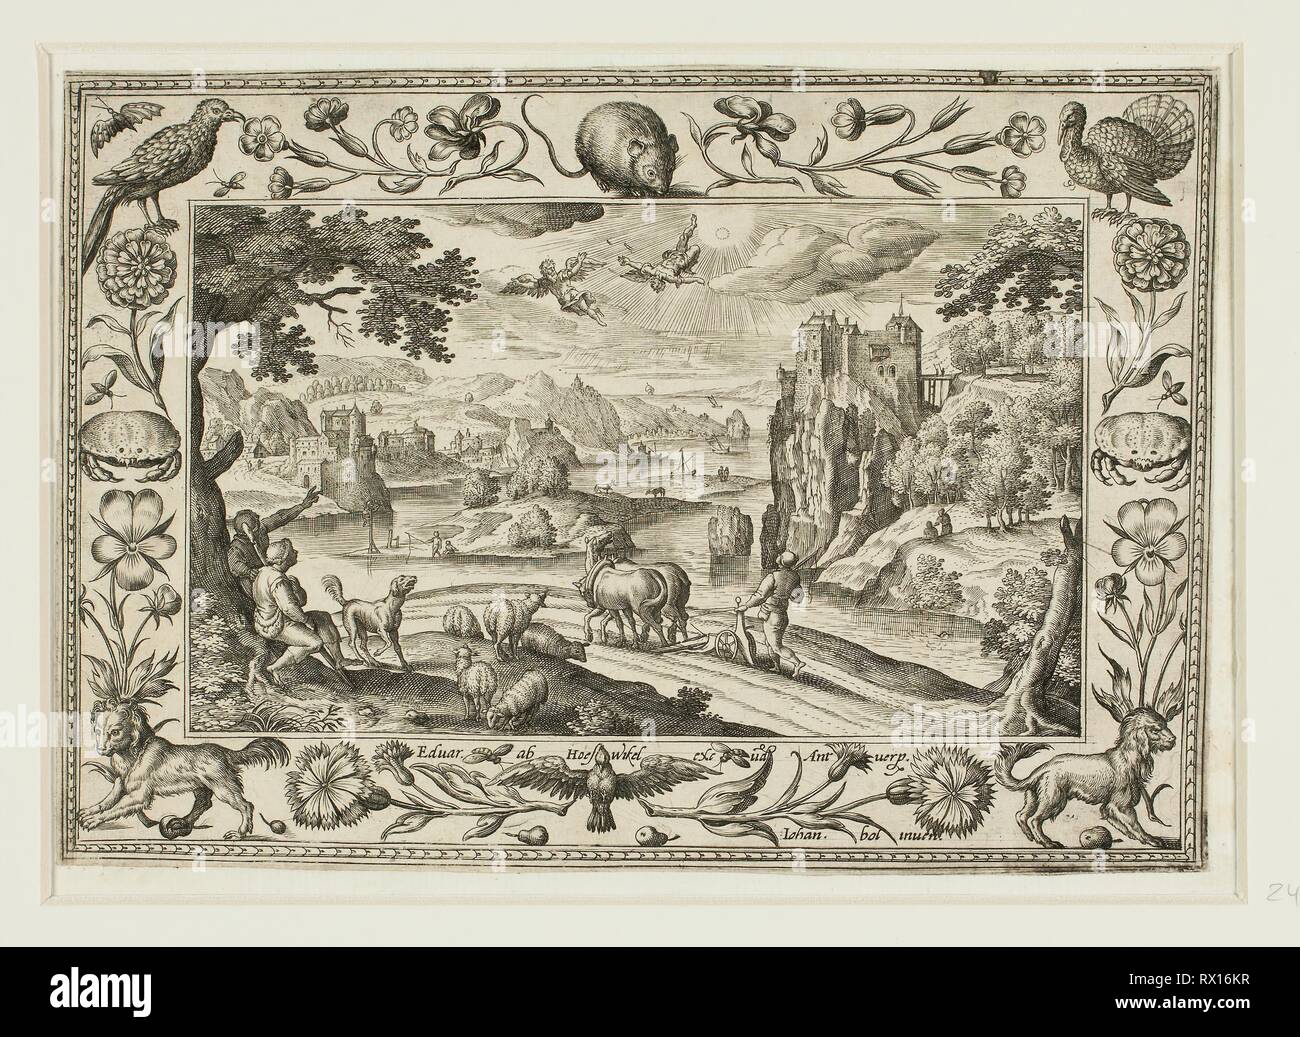 The Fall of Icarus, from Landscapes with Old and New Testament Scenes and Hunting Scenes. Adriaen Collaert (Flemish, c. 1560-1618); after Hans Bol (Flemish, 1535-1593); published by Anna van Hoeswinckel (Flemish). Date: 1584. Dimensions: 143 × 200 mm (image/primary support, trimmed within plate mark); 176 × 238 mm (secondary support). Engraving in black on cream laid paper, laid down on cream laid paper. Origin: Flanders. Museum: The Chicago Art Institute. Author: II Adriaen Collaert. Stock Photo